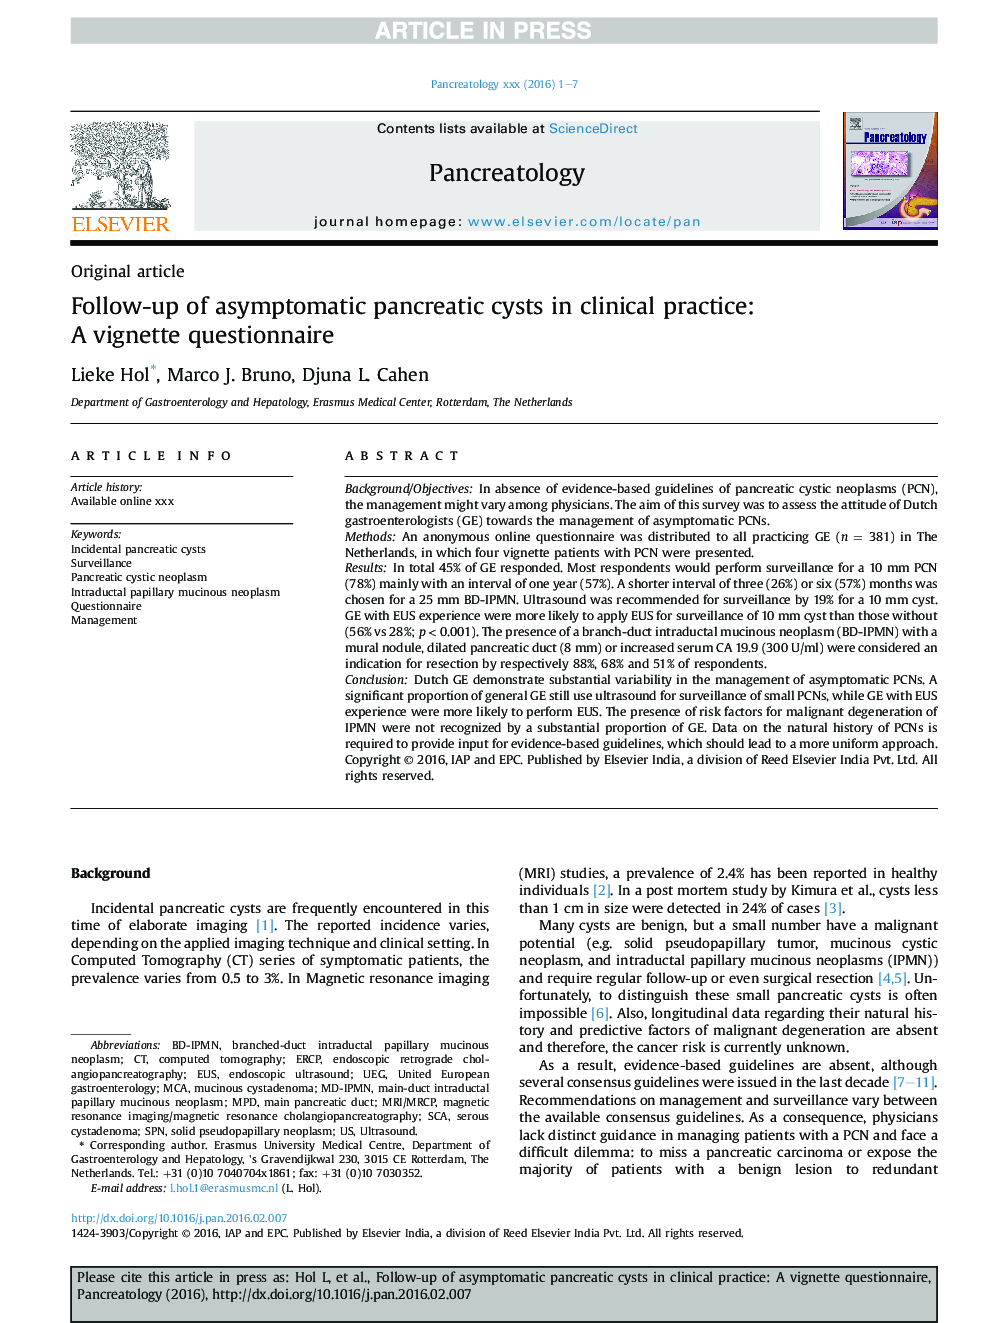 Follow-up of asymptomatic pancreatic cysts in clinical practice: AÂ vignette questionnaire